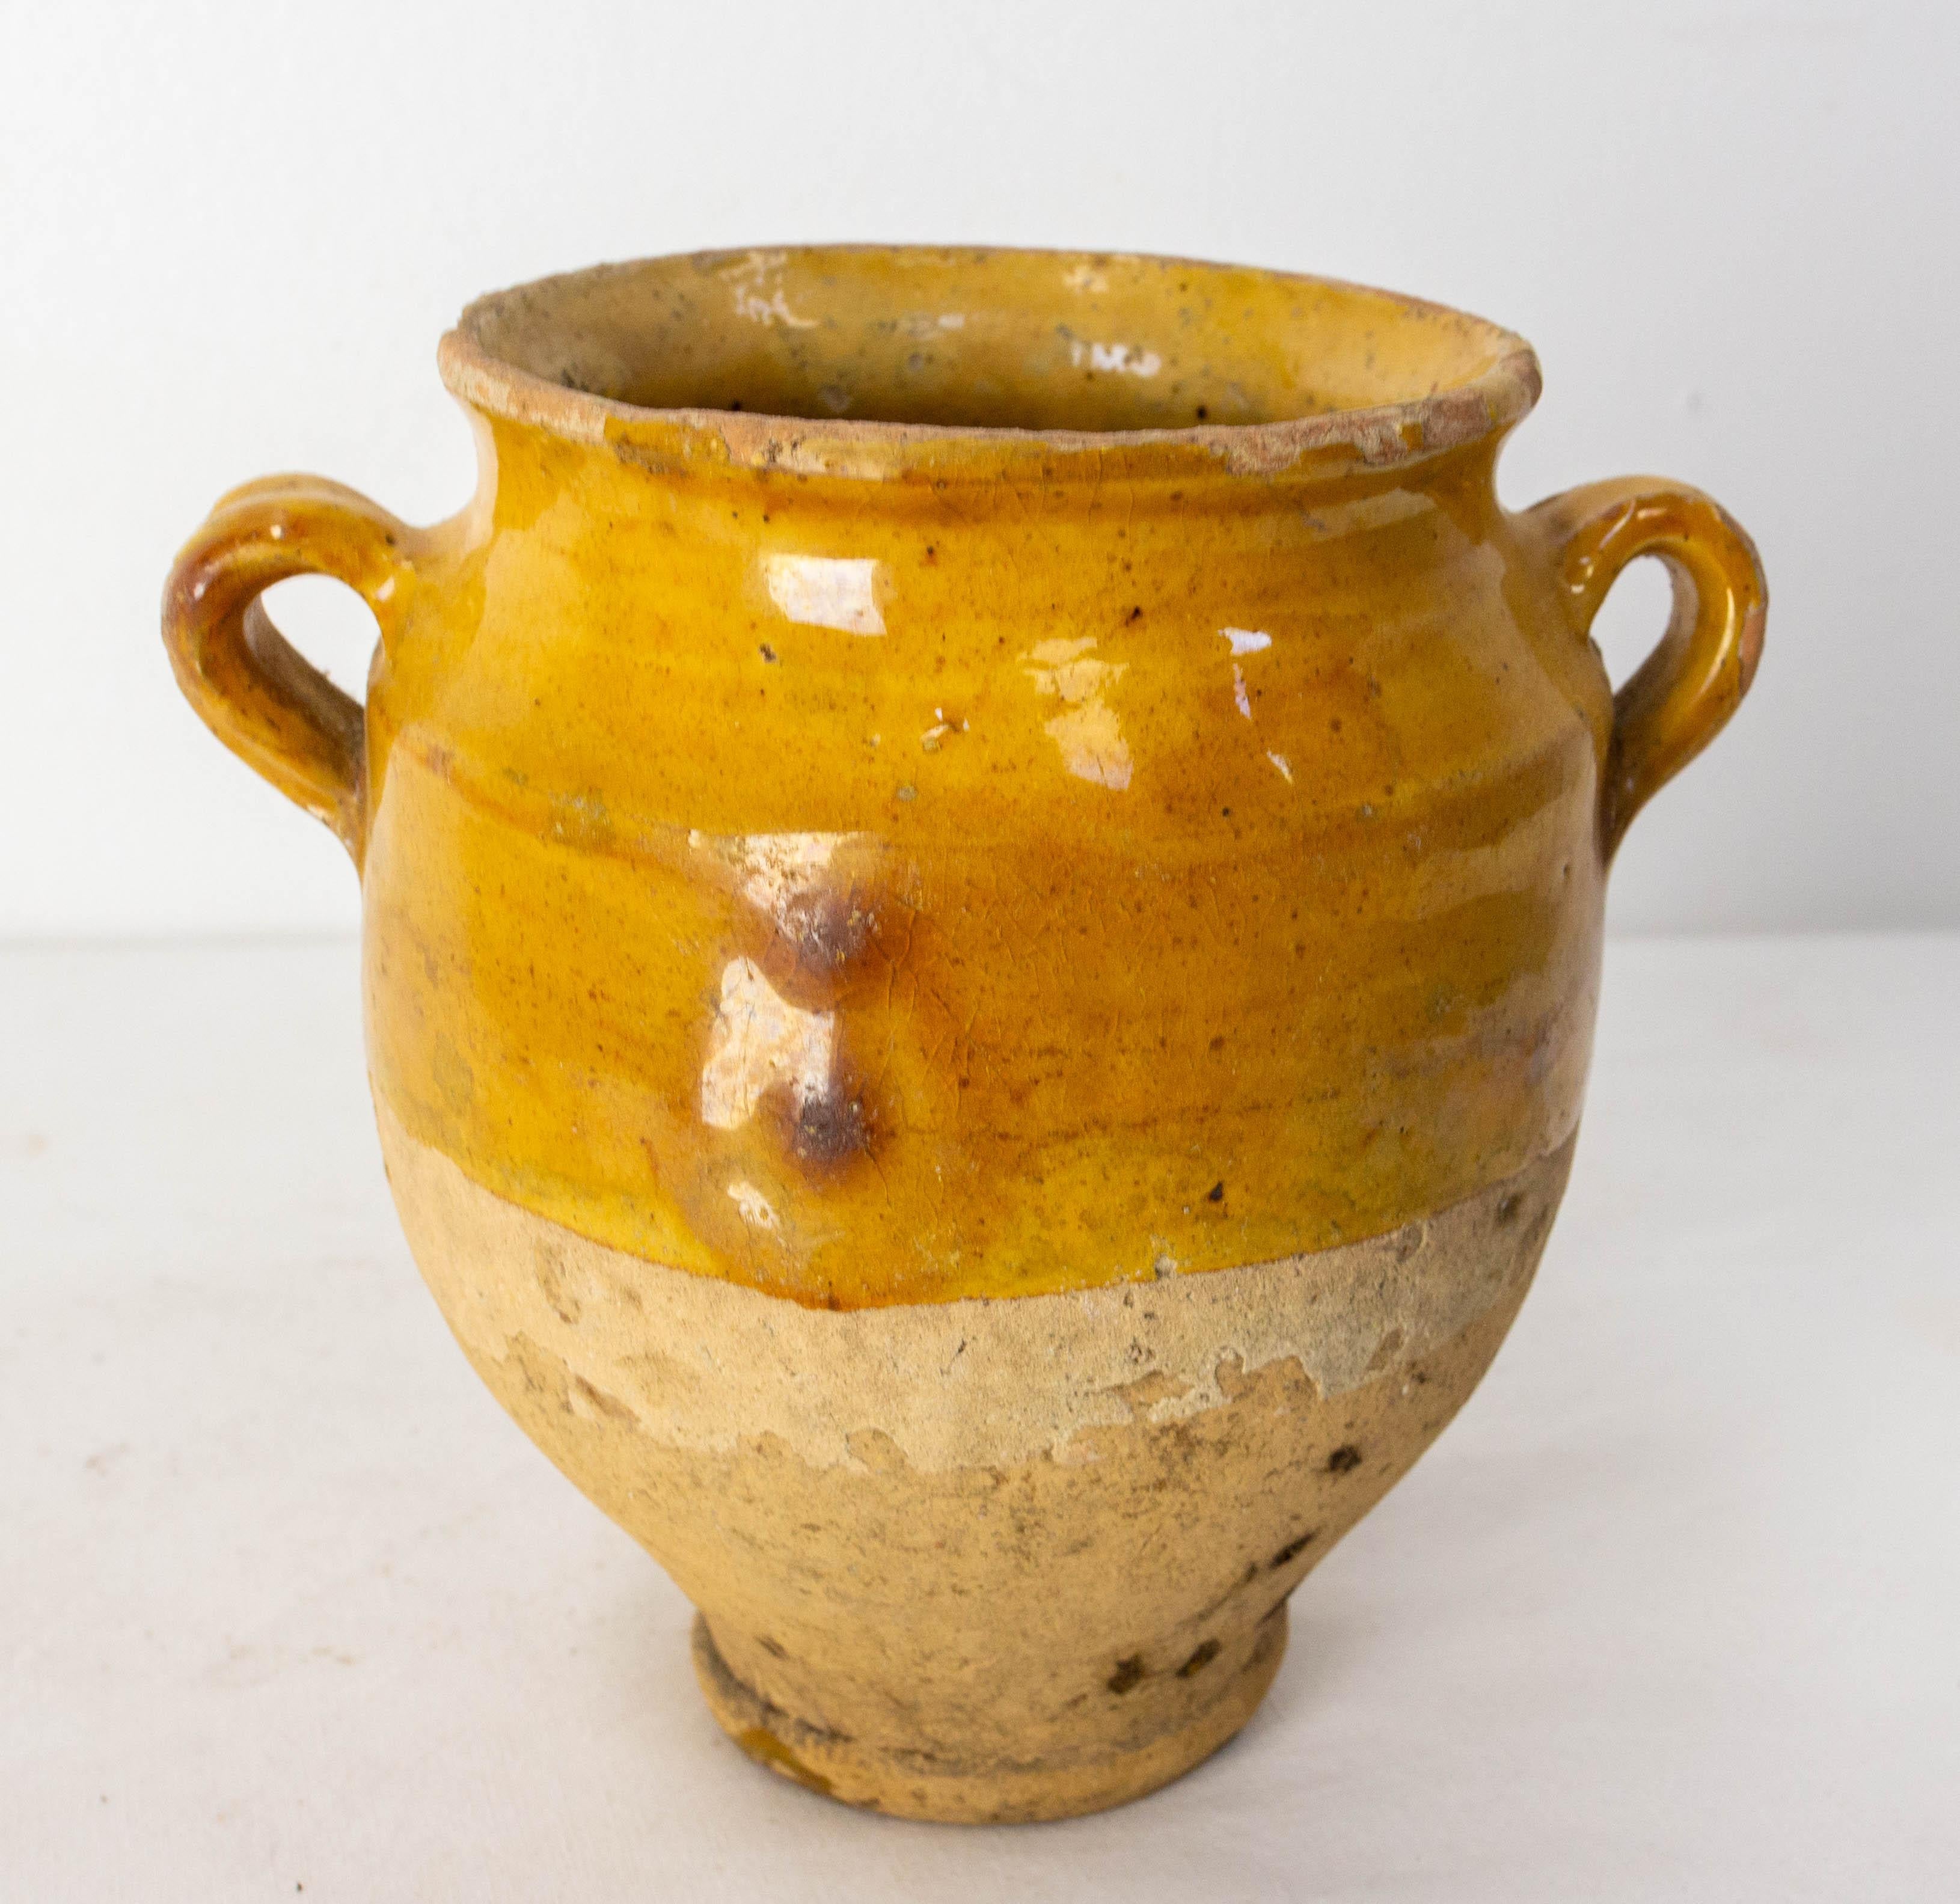 French terracotta confit pot.
Traditional large earthenware pottery confit pot from South West France with yellow glaze.
This vessel was used from the 19th to the mid-20th century to conserve food.
The handmade nature of these pots makes each one